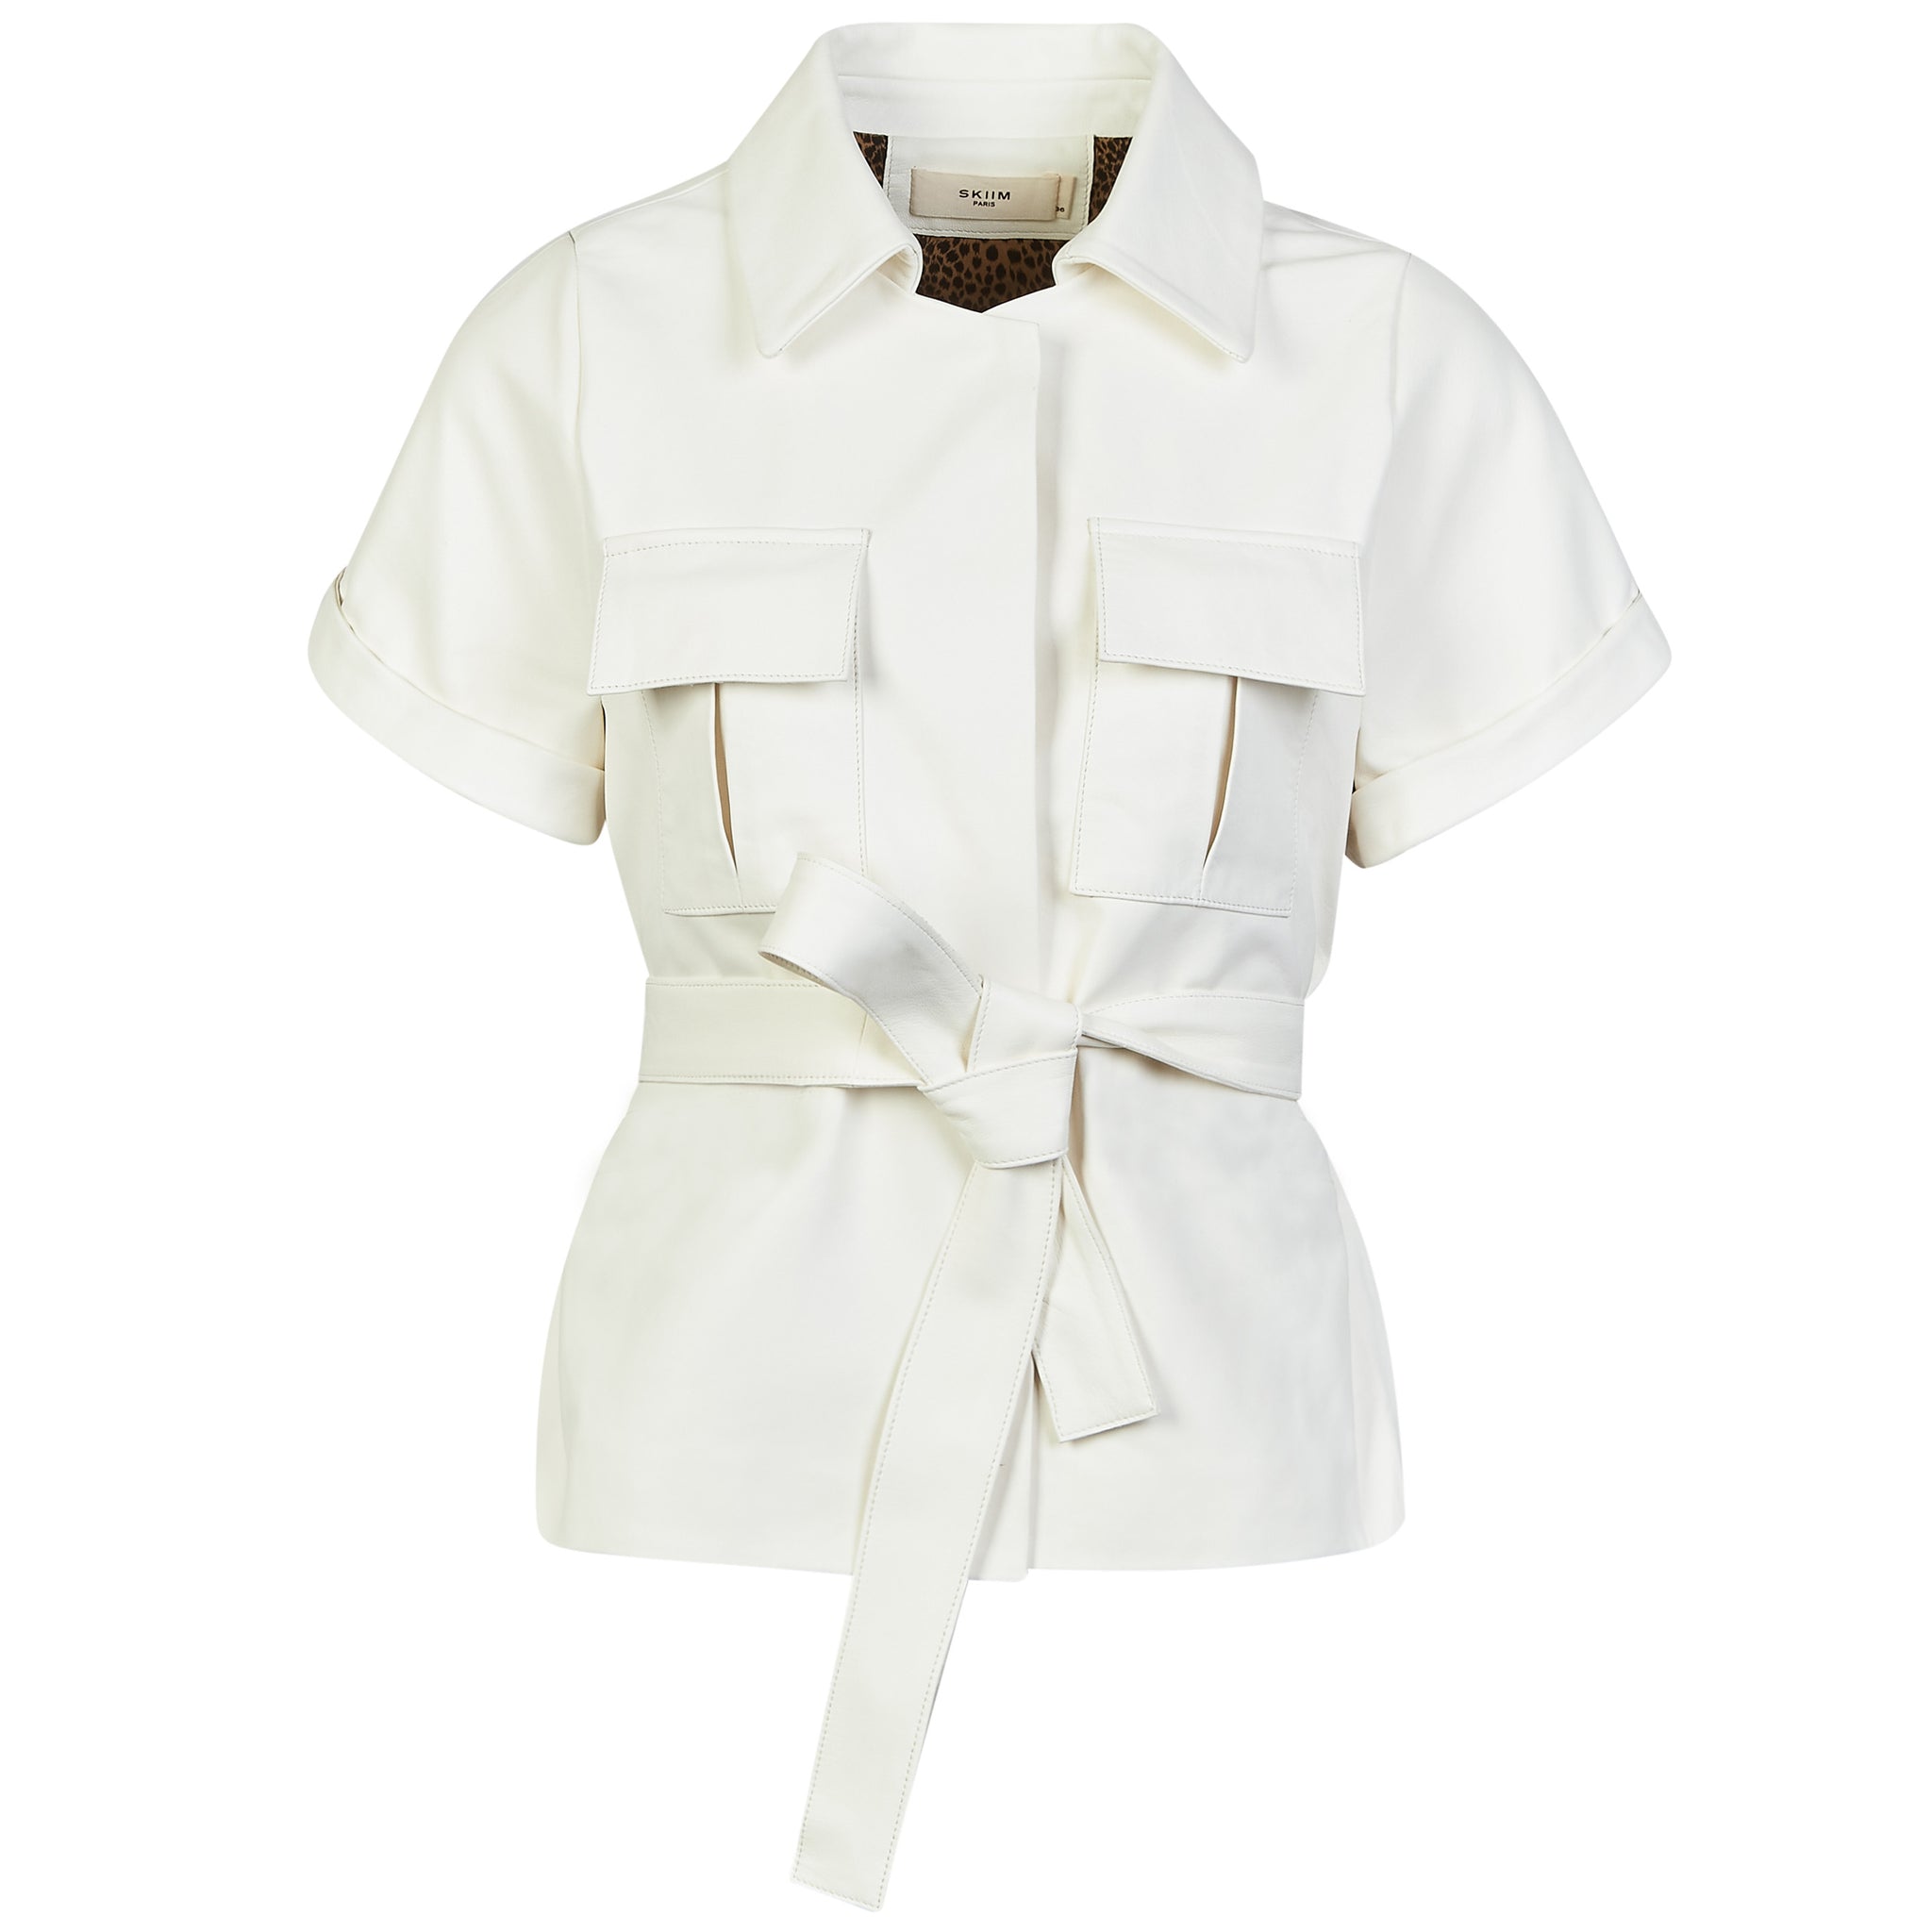 Eloise BELTED COLLARED JACKET - OFF WHITE